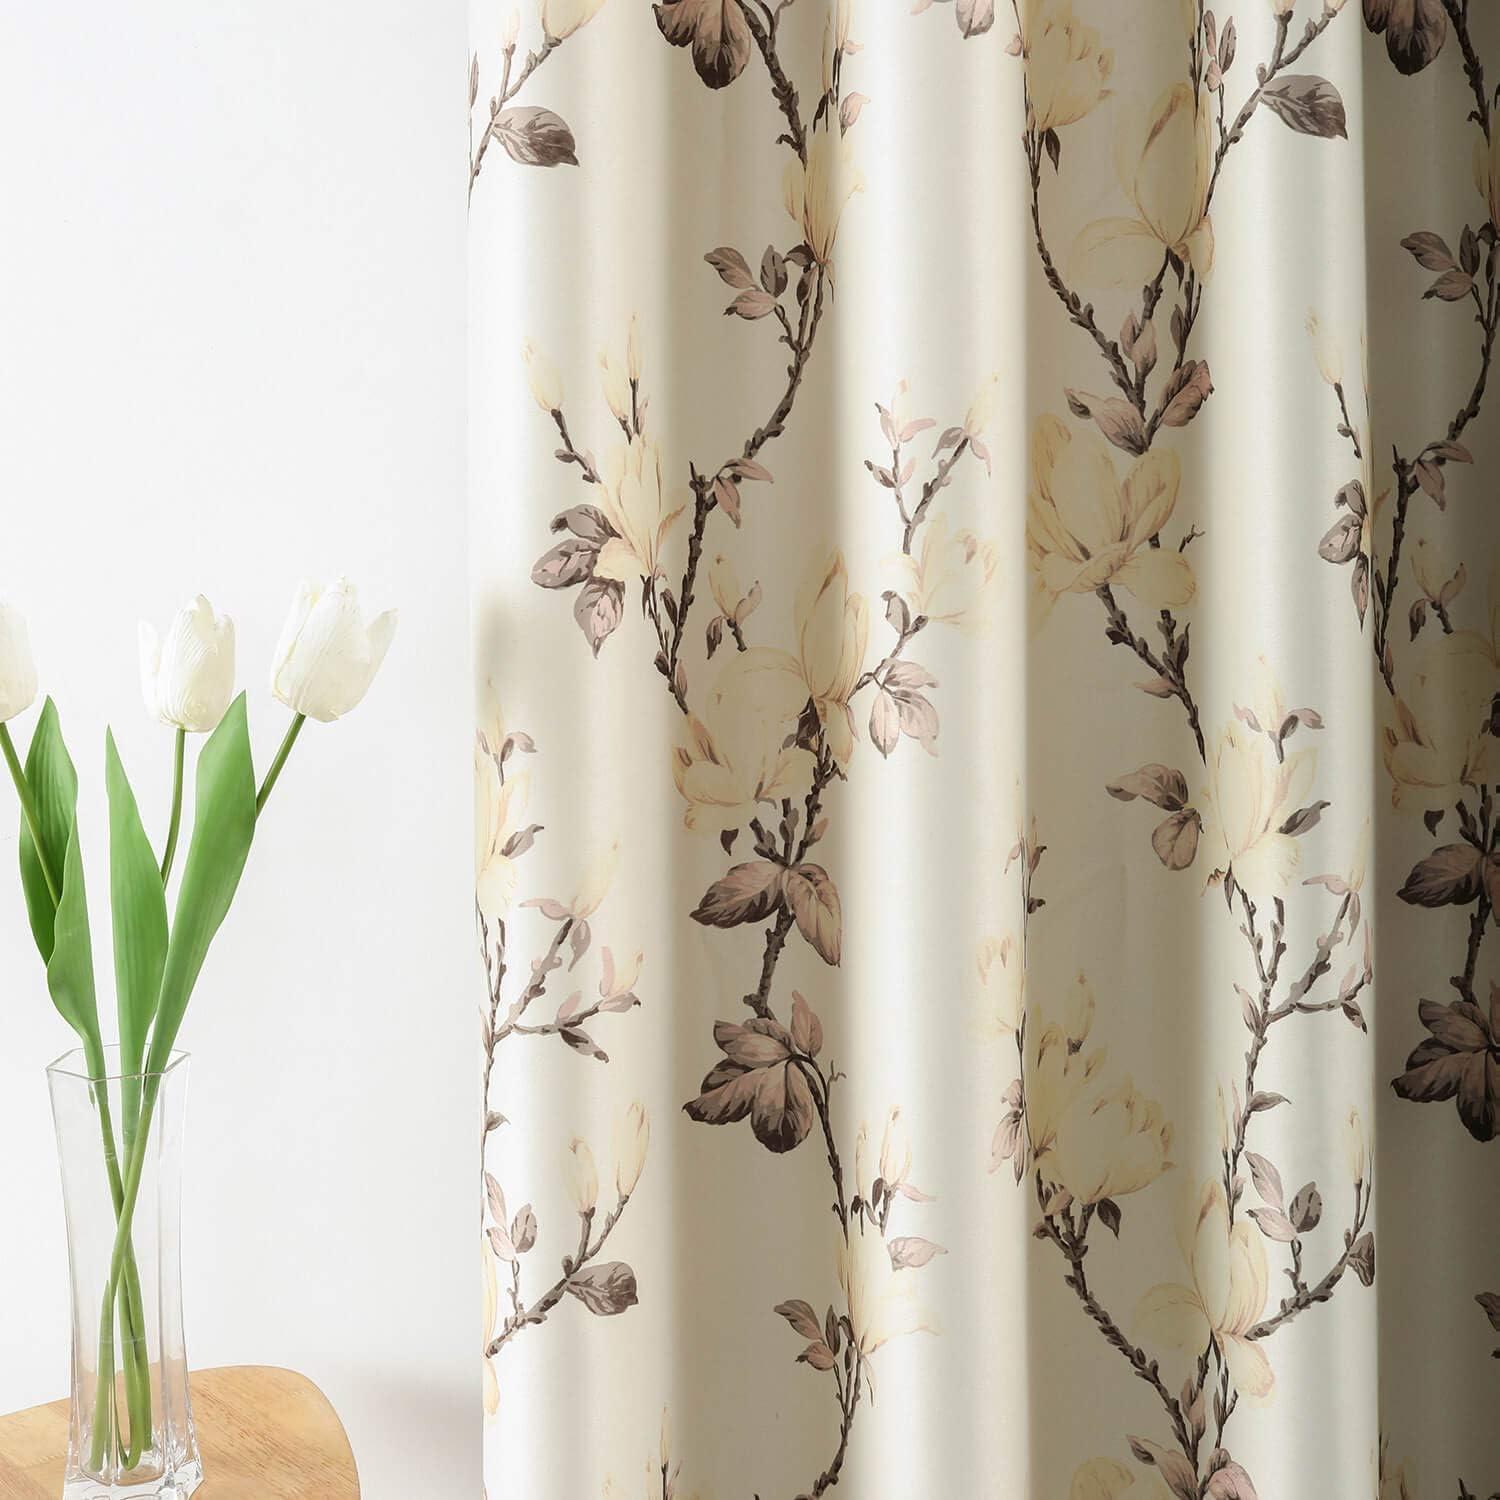 VOGOL Flower Blackout Curtains for Bedroom 2 Panels, Grommet Thermal Insulated Room Darkening Curtains for Living Room Patio Door, 52 x 63 Inch